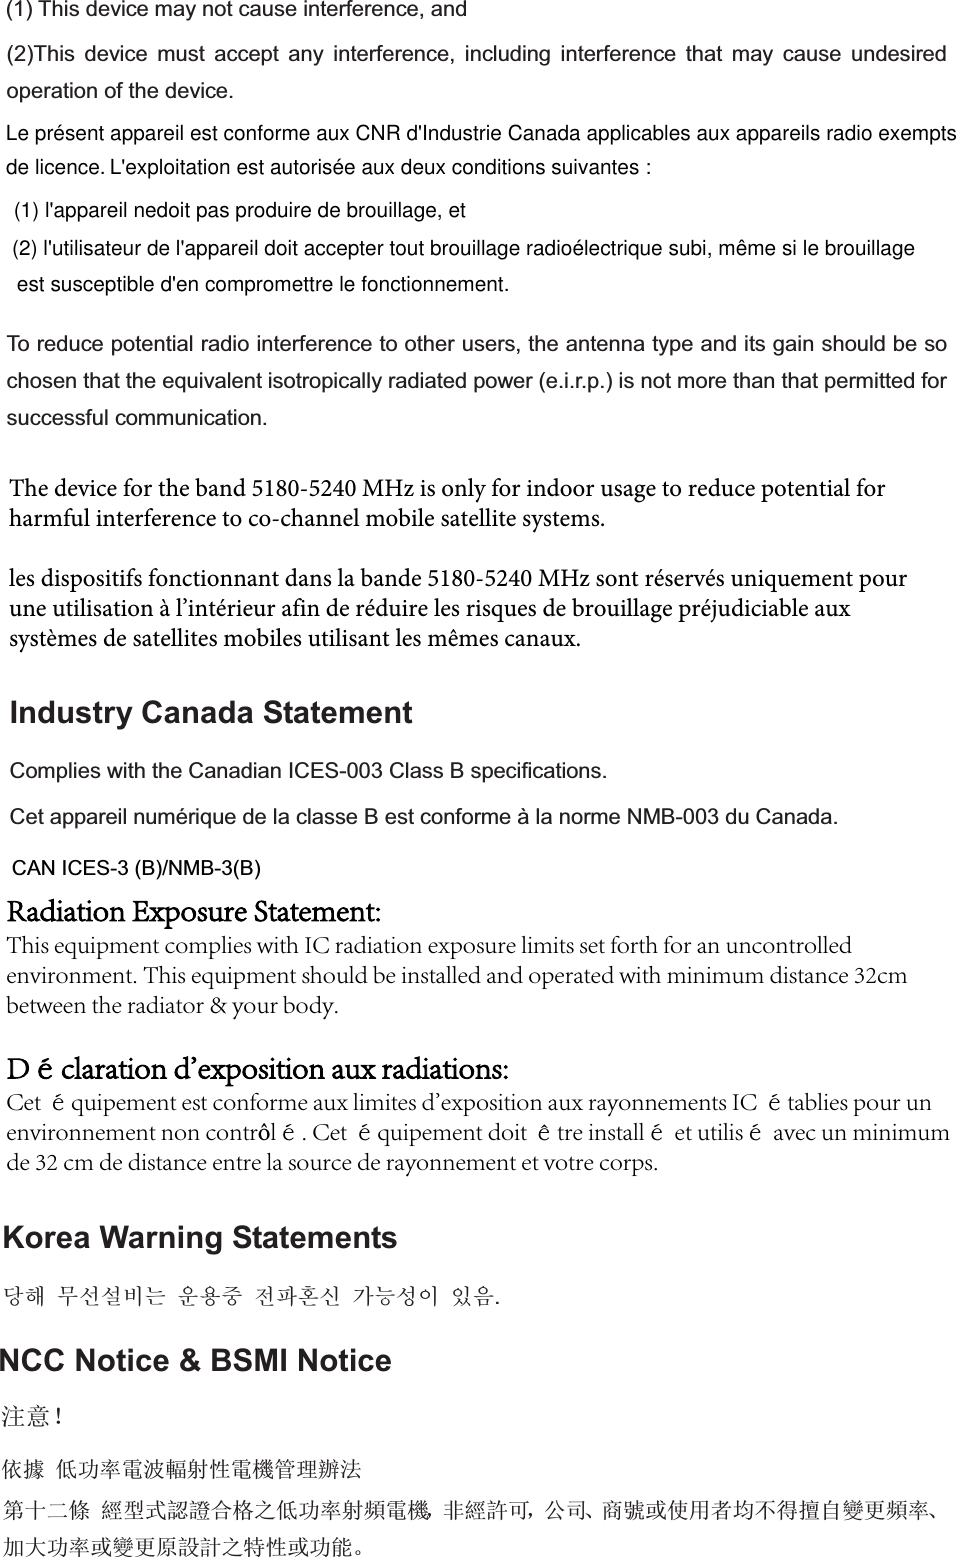 (2)This device must accept any interference, including interference that may cause undesired operation of the device. To reduce potential radio interference to other users, the antenna type and its gain should be so chosen that the equivalent isotropically radiated power (e.i.r.p.) is not more than that permitted for successful communication.  Industry Canada Statement Complies with the Canadian ICES-003 Class B specifications. Cet appareil numérique de la classe B est conforme à la norme NMB-003 du Canada. Korea Warning Statements ╏䟊 ⶊ㍶㍺゚⓪ 㤊㣿㭧 㩚䕢䢒㔶 Ṗ⓻㎇㧊 㧞㦢. NCC Notice &amp; BSMI Notice ⌘᜿ʽ׍ᬊվ࣏⦷䴫⌒䕫ሴᙗ䴫₏㇑⨶䗖⌅CAN ICES-3 (B)/NMB-3(B)Le présent appareil est conforme aux CNR d&apos;Industrie Canada applicables aux appareils radio exempts L&apos;exploitation est autorisée aux deux conditions suivantes : (1) l&apos;appareil nedoit pas produire de brouillage, et (2) l&apos;utilisateur de l&apos;appareil doit accepter tout brouillage radioélectrique subi, même si le brouillage est susceptible d&apos;en compromettre le fonctionnement. de licence. The device for the band 5180-5240 MHz is only for indoor usage to reduce potential for harmful interference to co-channel mobile satellite systems.les dispositifs fonctionnant dans la bande 5180-5240 MHz sont réservés uniquement pour une utilisation à l’intérieur afin de réduire les risques de brouillage préjudiciable aux systèmes de satellites mobiles utilisant les mêmes canaux.(1) This device may not cause interference, and ㅜॱҼọ㏃රᔿ䂽䅹ਸṬѻվ࣏⦷ሴ乫䴫₏ˈ䶎㏃䁡ਟˈޜਨǃ୶㲏ᡆ֯⭘㘵൷нᗇ᫵㠚䆺ᴤ乫⦷ǃ࣐བྷ࣏⦷ᡆ䆺ᴤ৏䁝䀸ѻ⢩ᙗᡆ࣏㜭ǄRadiation Exposure Statement: This equipment complies with IC radiation exposure limits set forth for an uncontrolled environment. This equipment should be installed and operated with minimum distance 32cm between the radiator &amp; your body. Déclaration d&apos;exposition aux radiations: Cet équipement est conforme aux limites d&apos;exposition aux rayonnements IC établies pour un environnement non contrôlé. Cet équipement doit être installé et utilisé avec un minimum de 32 cm de distance entre la source de rayonnement et votre corps.